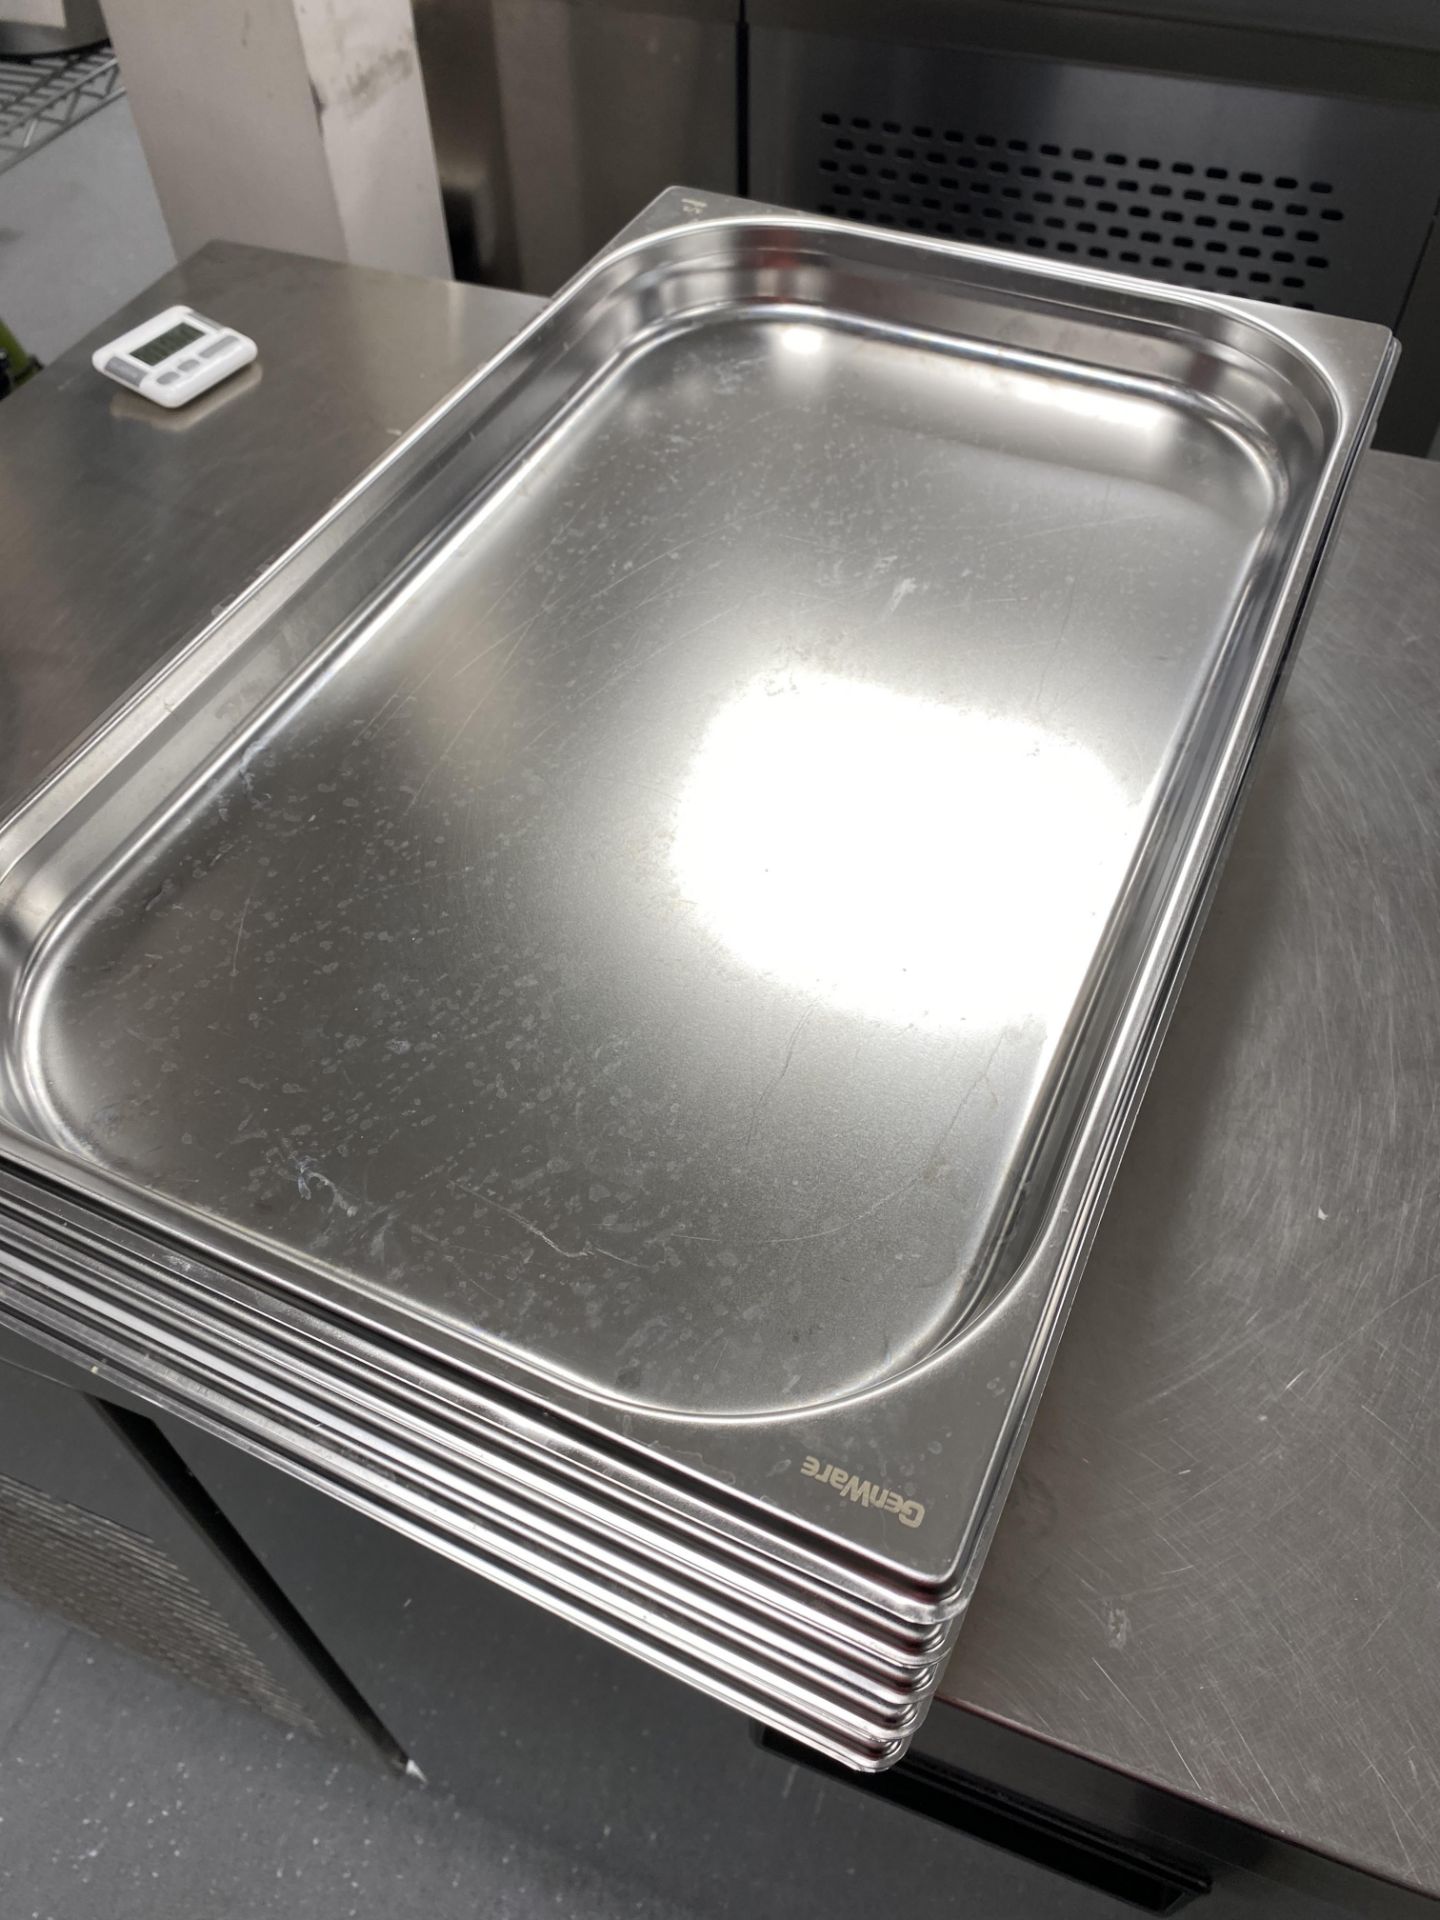 5: Genware Stainless Steel Gastronorm Pans, 5.8 Litre Capacity, Size - 1/1 40mm, with Lids - Current - Image 4 of 5